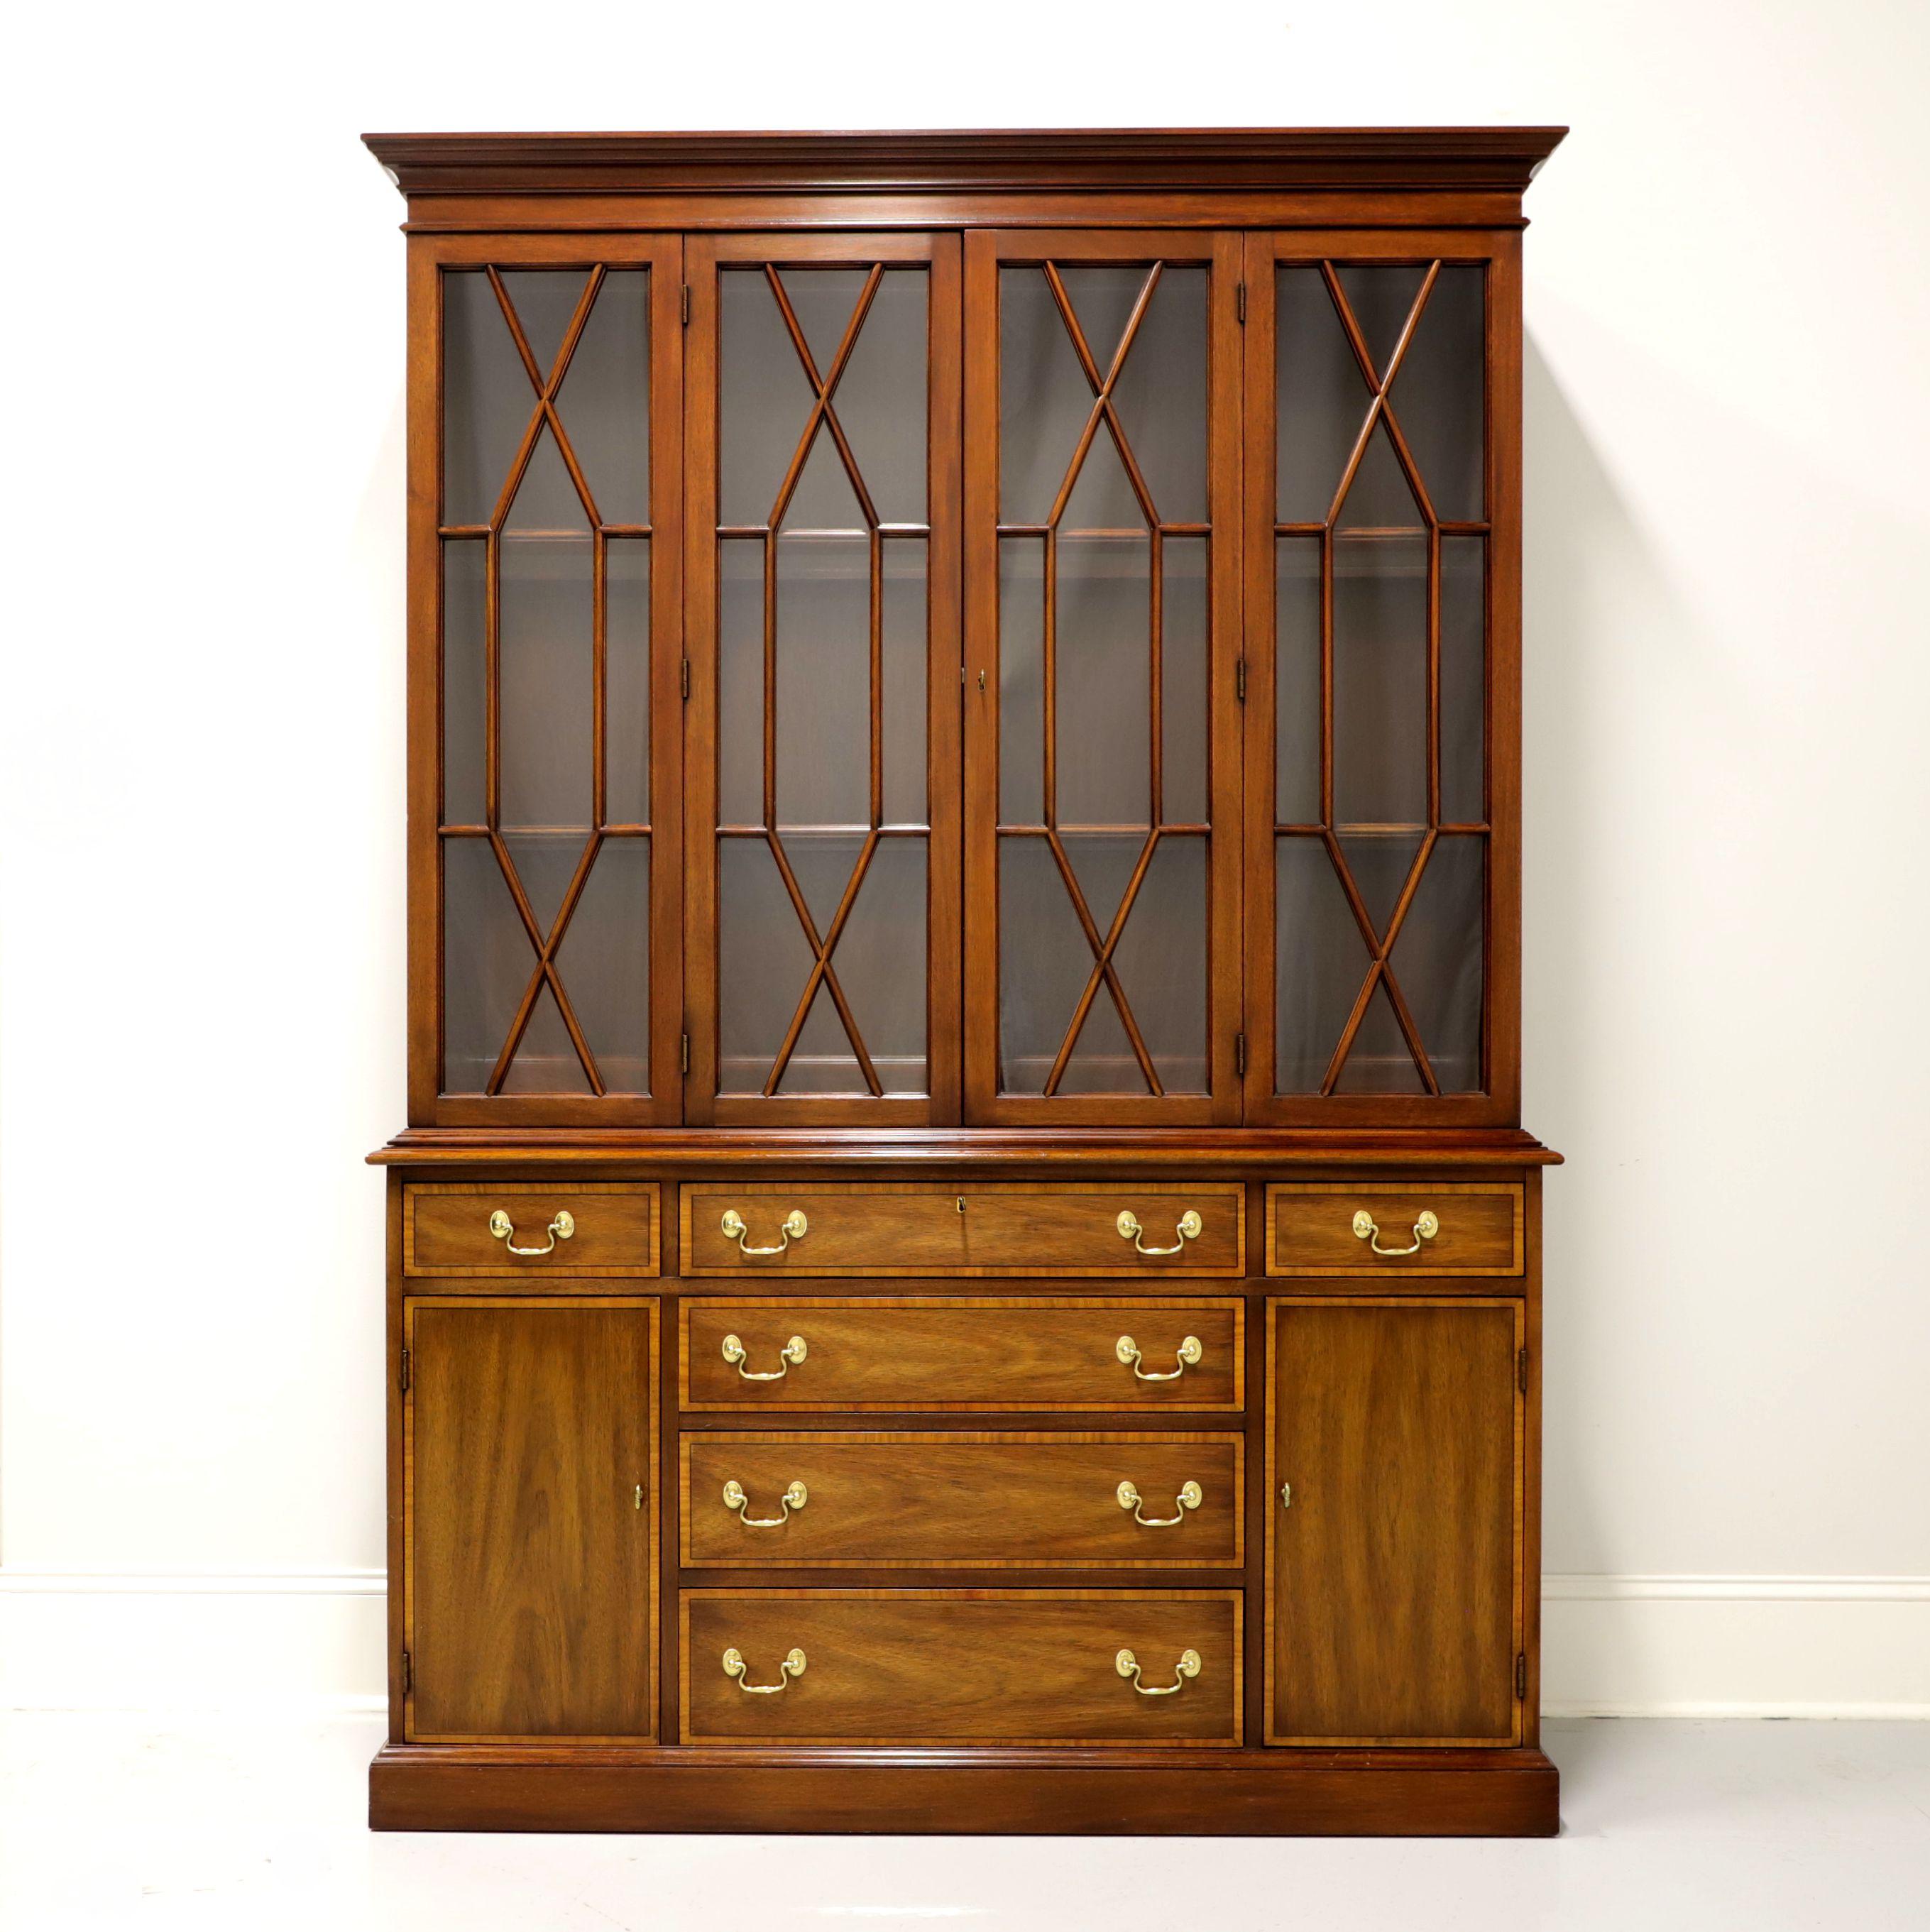 A Traditional style China cabinet by Henkel Harris of Winchester, Virginia, USA. Banded mahogany with brass hardware. Top cabinet is lighted and has two fixed wood plate grooved shelves with glass inserts behind two lockable glass doors with